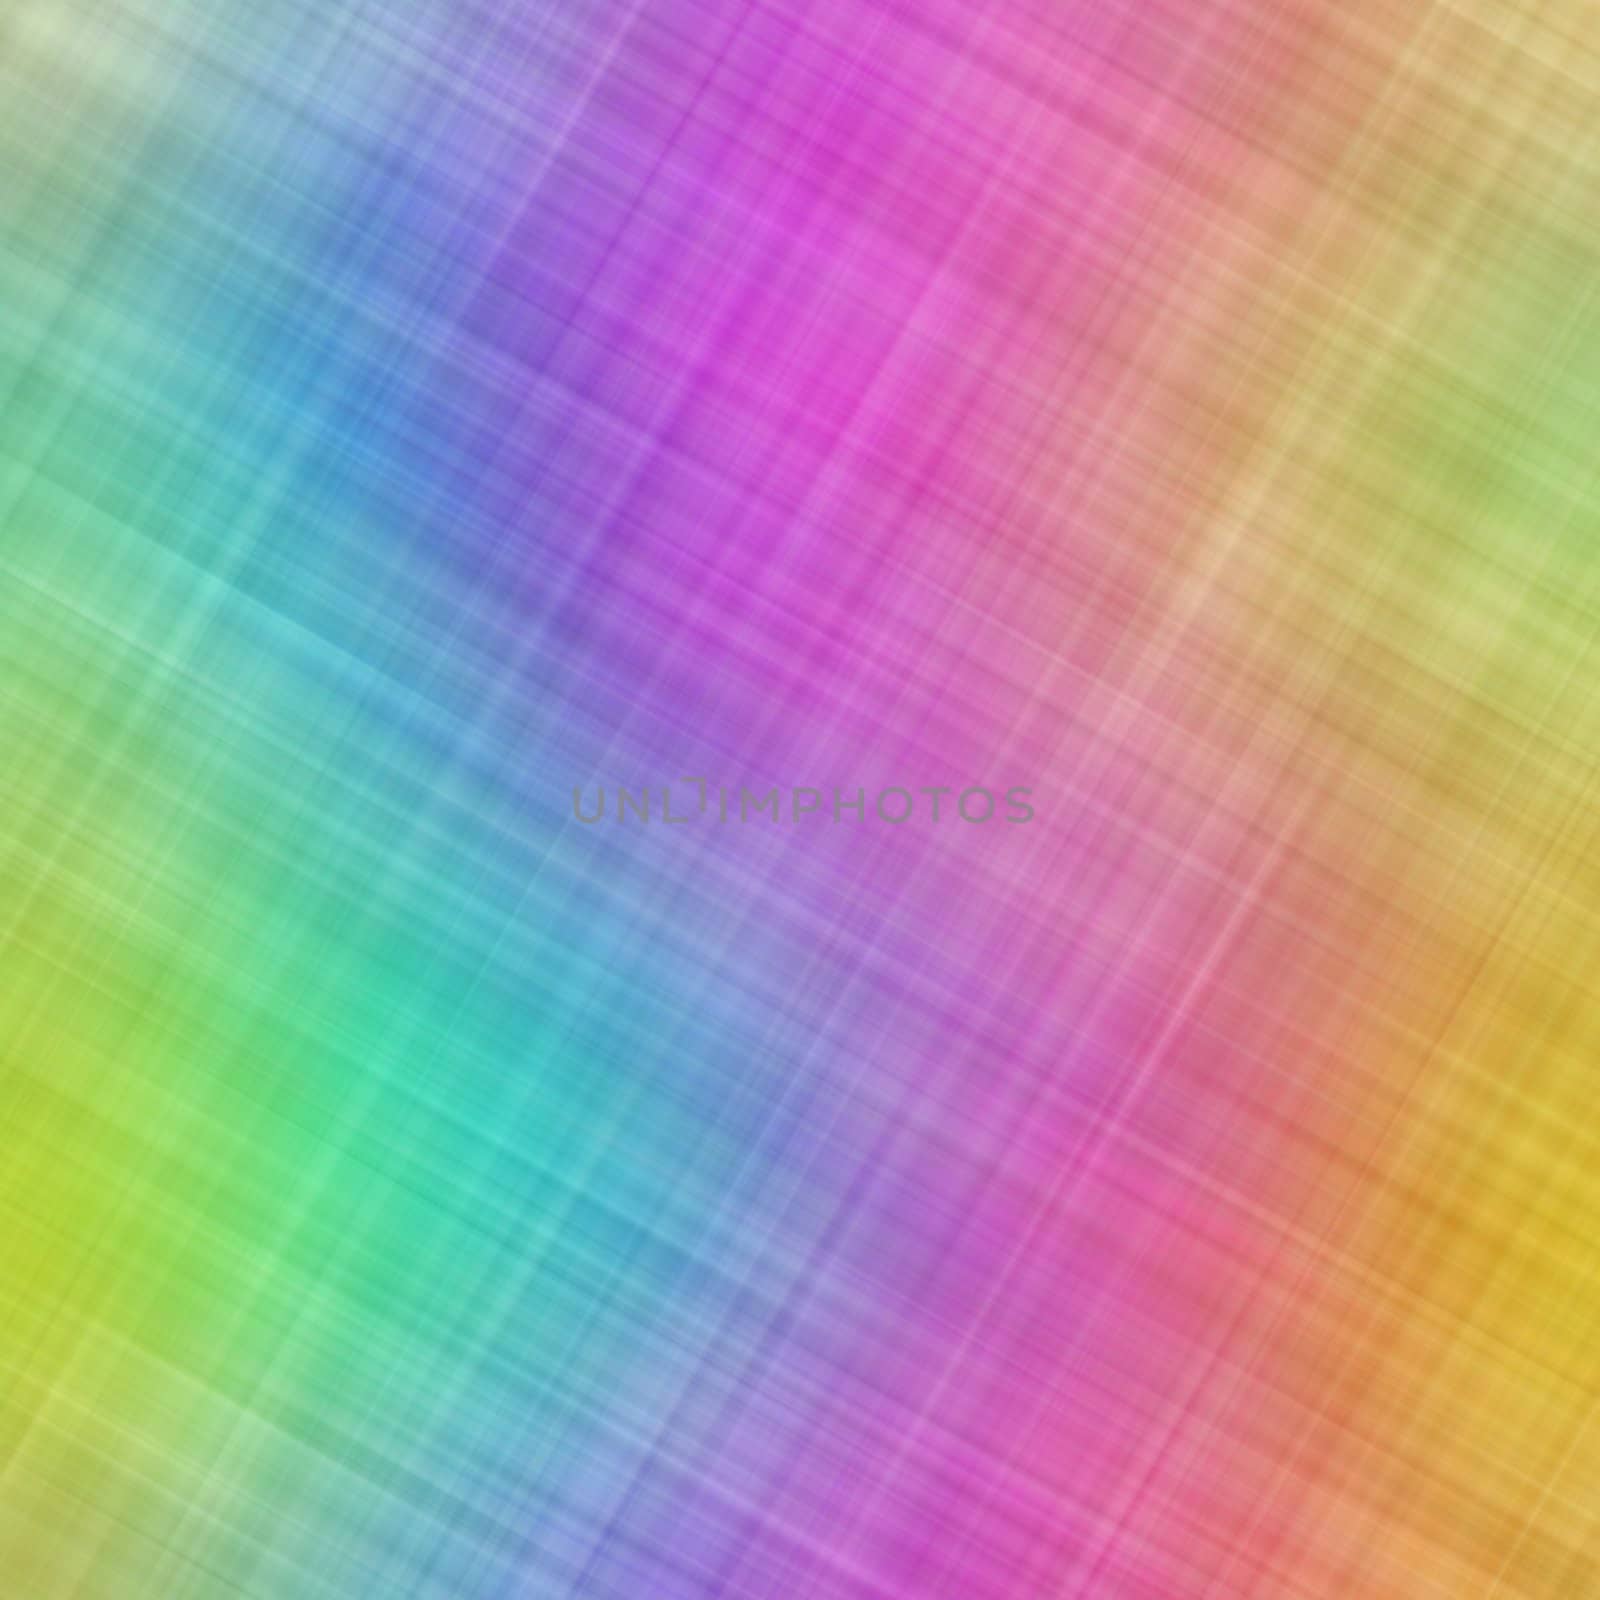 bright texture of flowing blur lines in rainbow colors